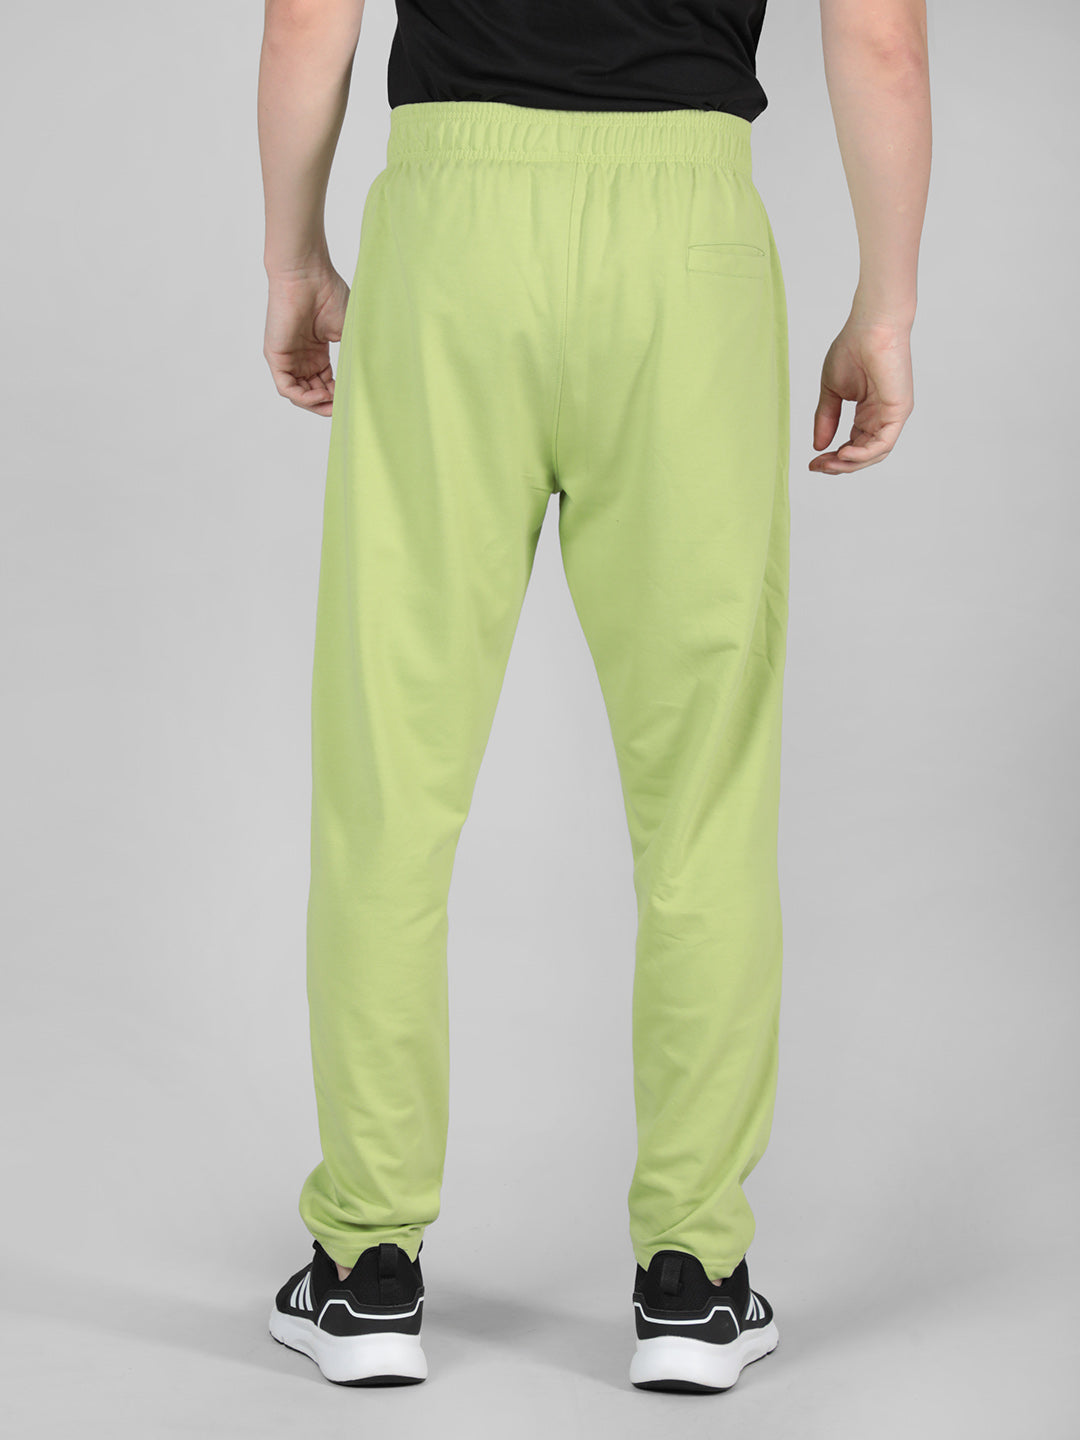 Men's Trackpant Lower with Pocket